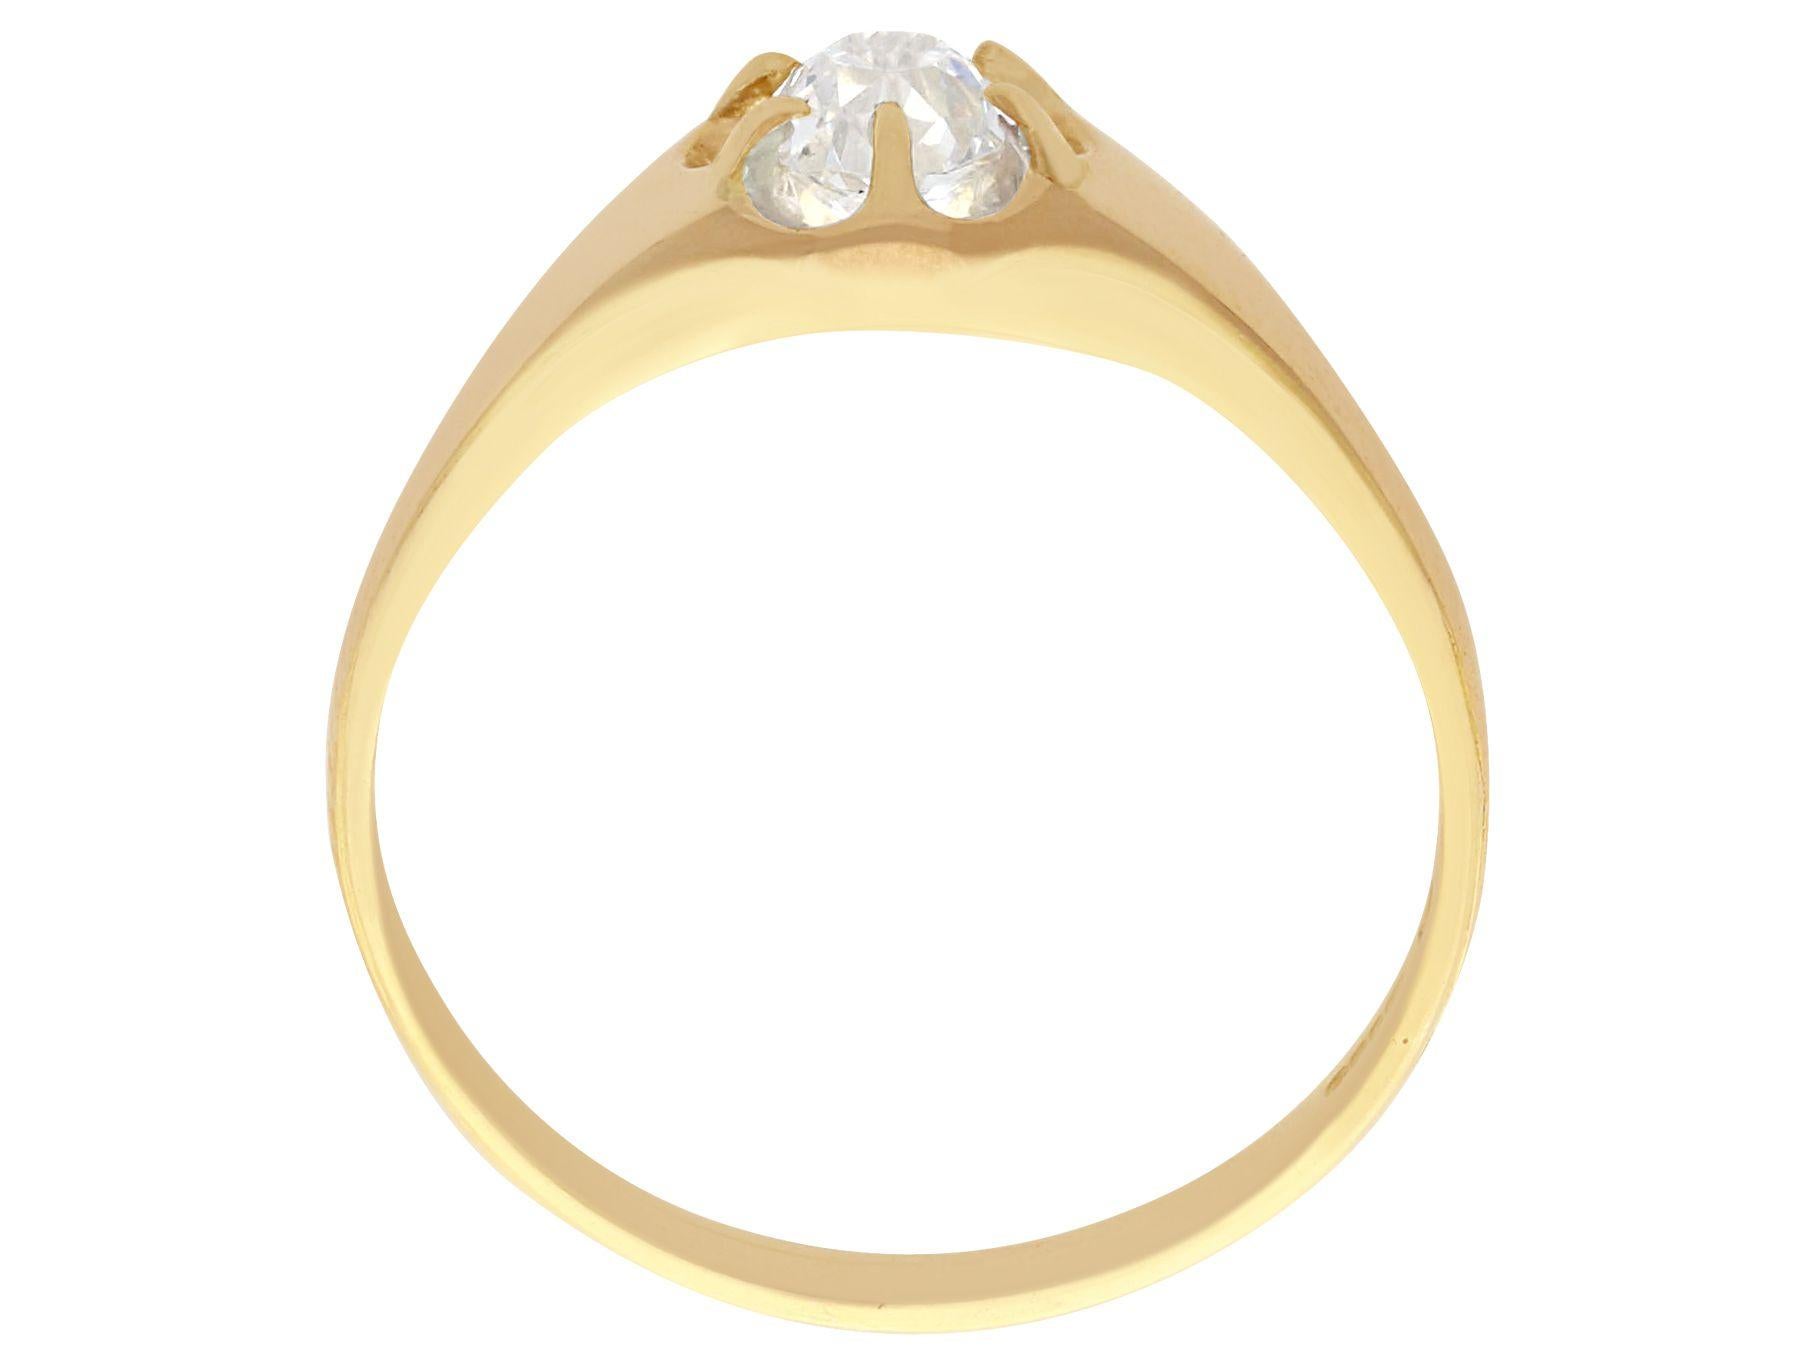 A fine and impressive 0.48 carat diamond and 18 karat yellow gold gent's solitaire ring; part of our diverse contemporary jewelry collections.

This fine and impressive gent's solitaire ring has been crafted in 18k yellow gold.

The contemporary